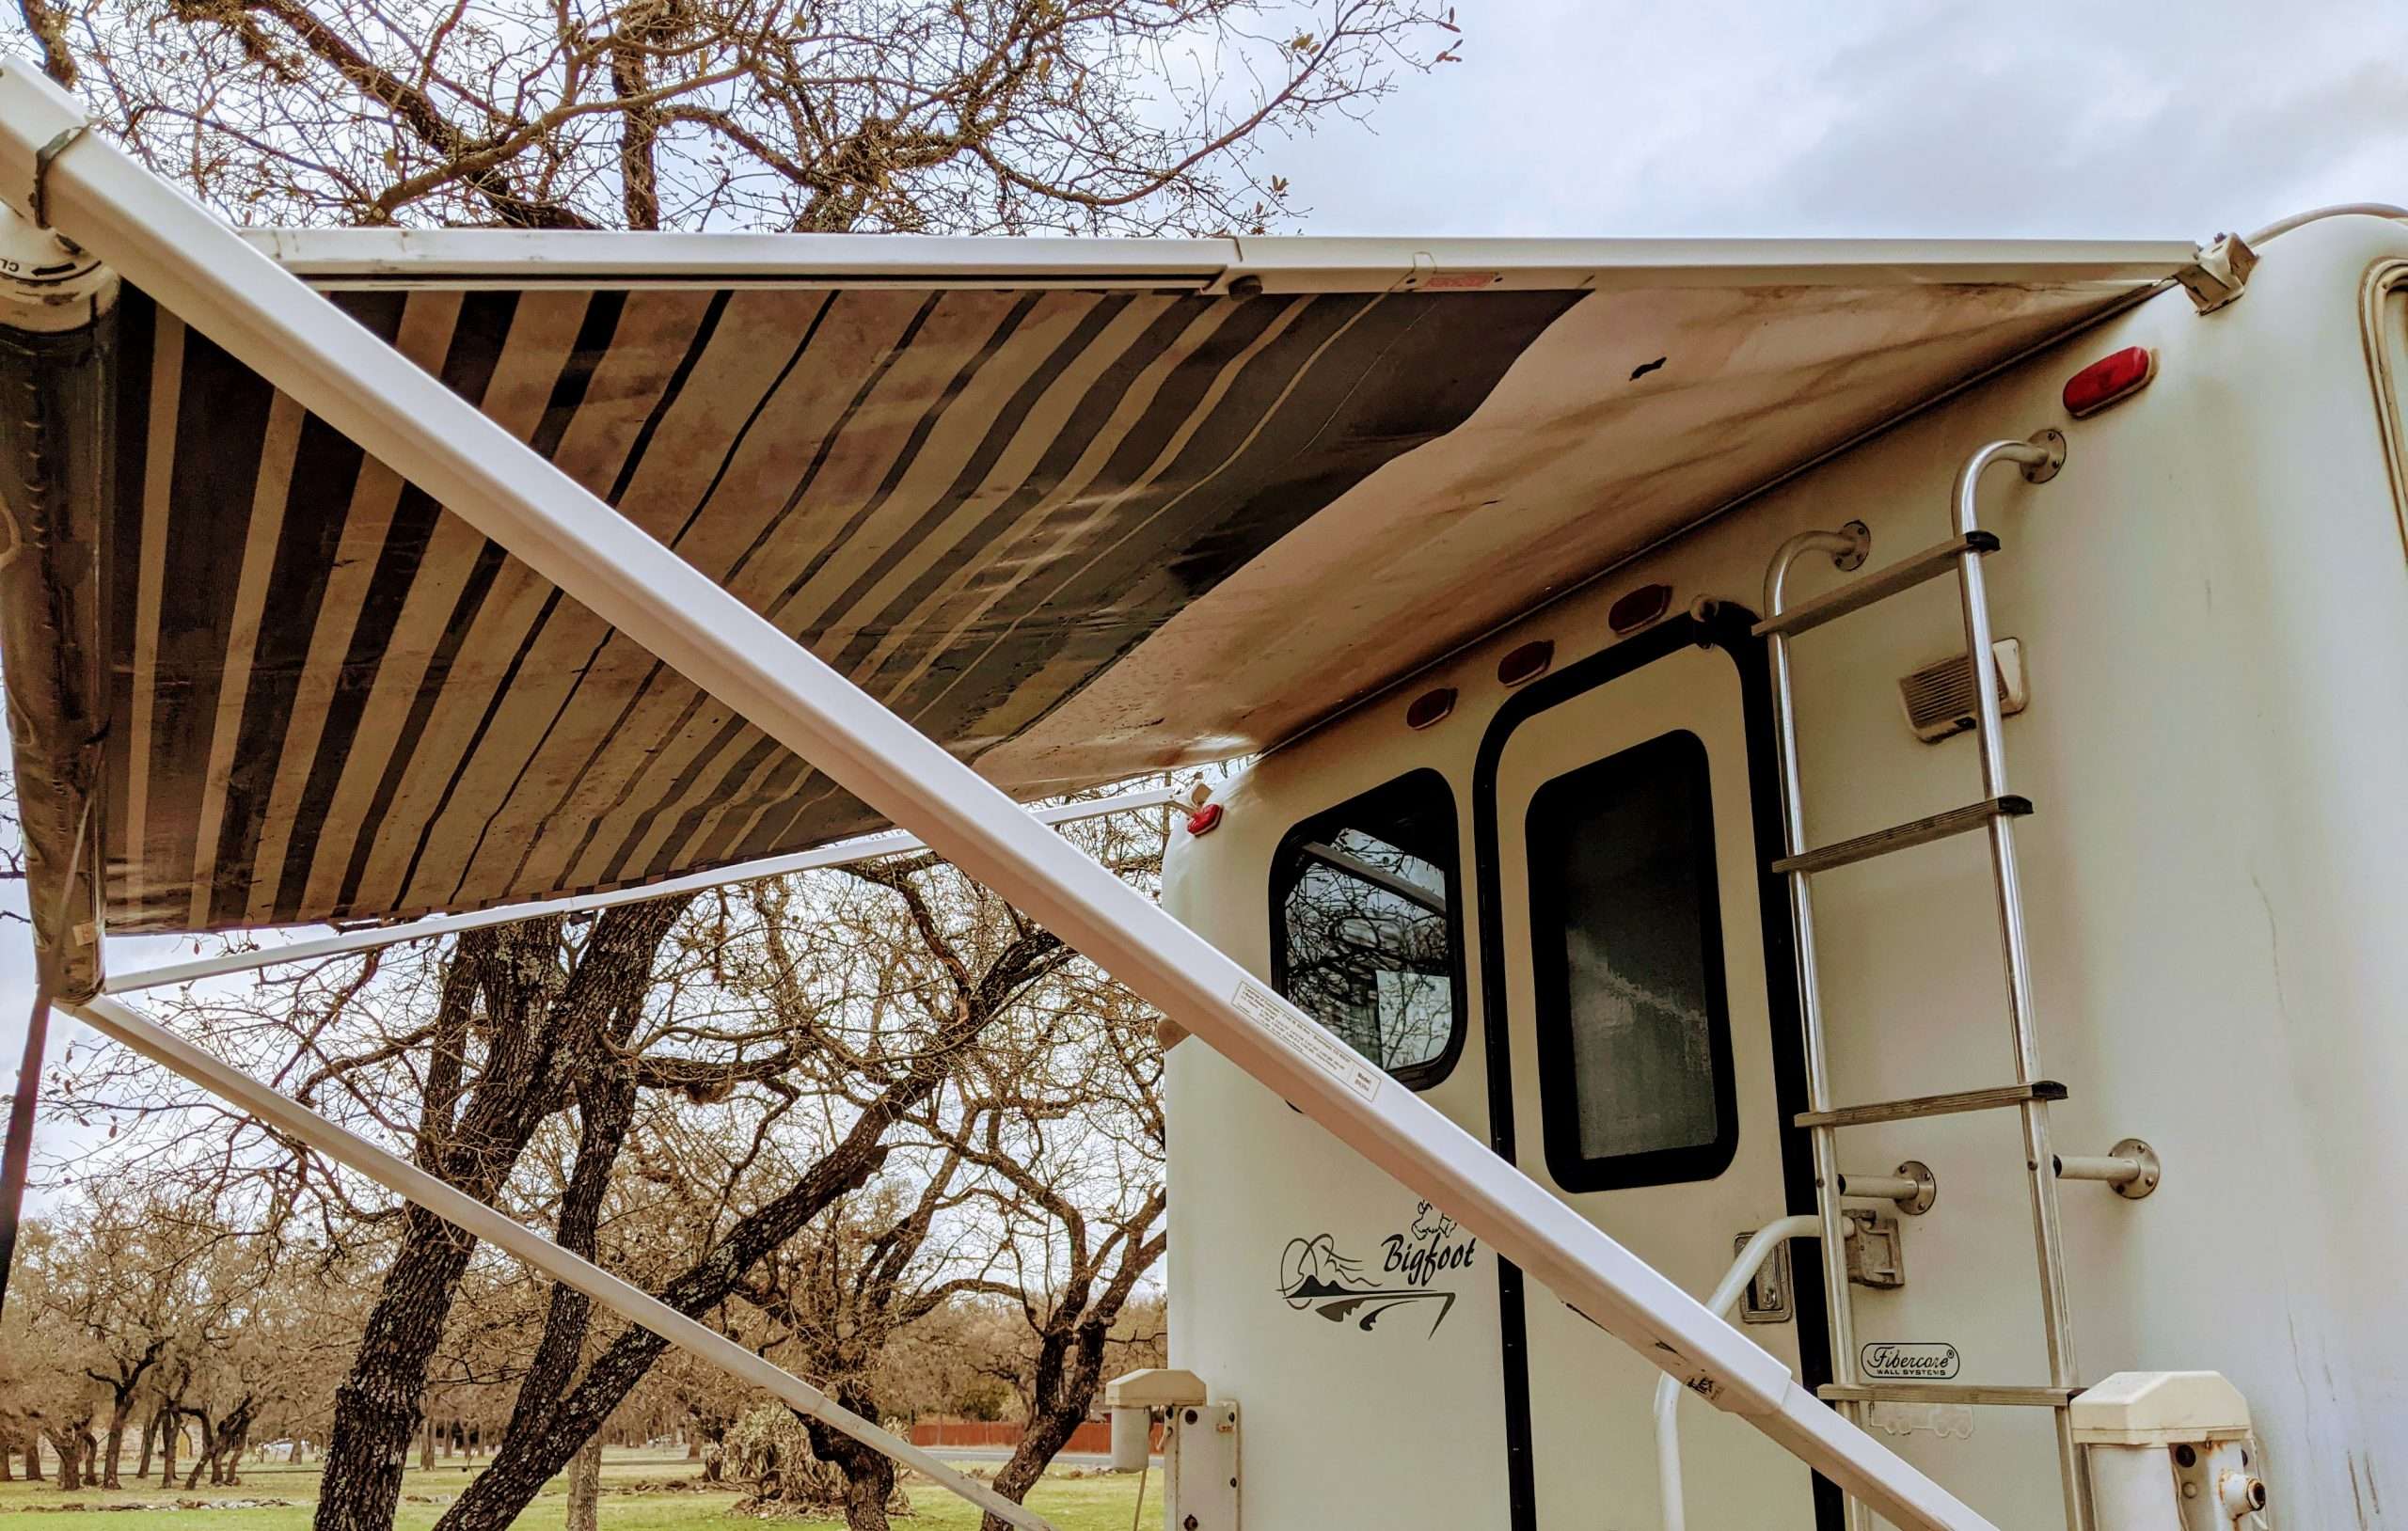 What Are RV Awnings Made Of